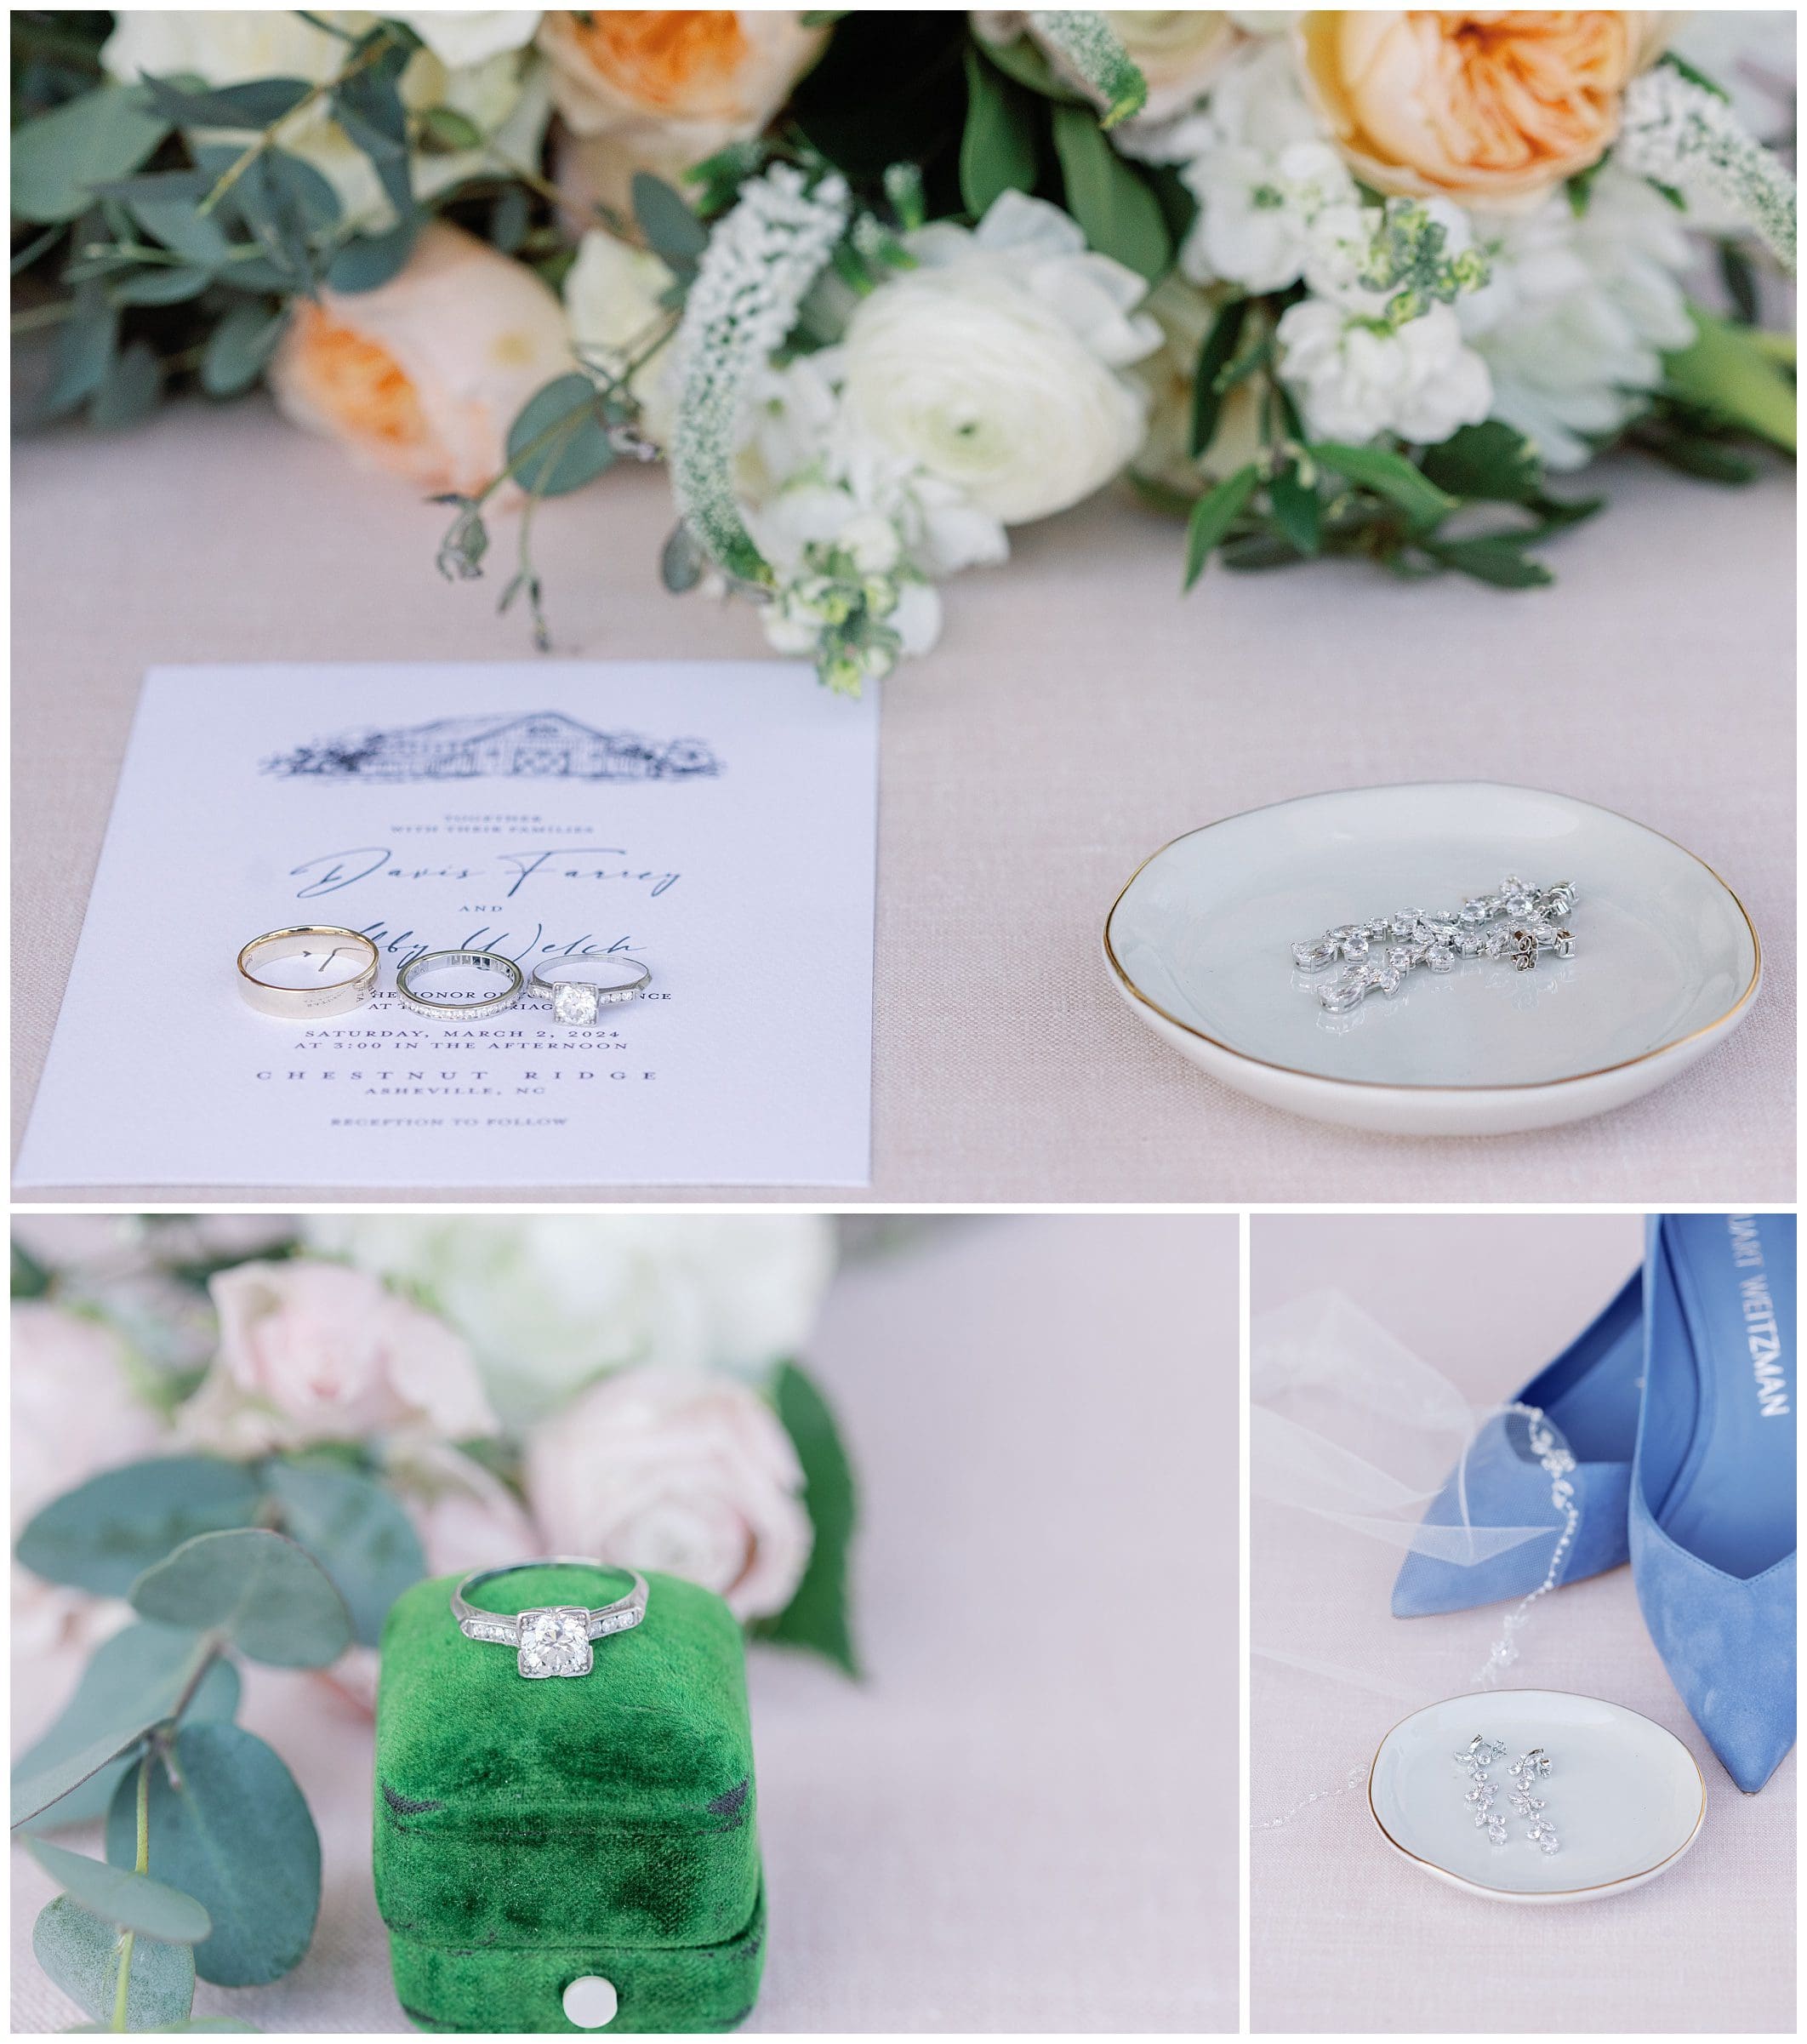 A collage of wedding rings and flowers on a table.